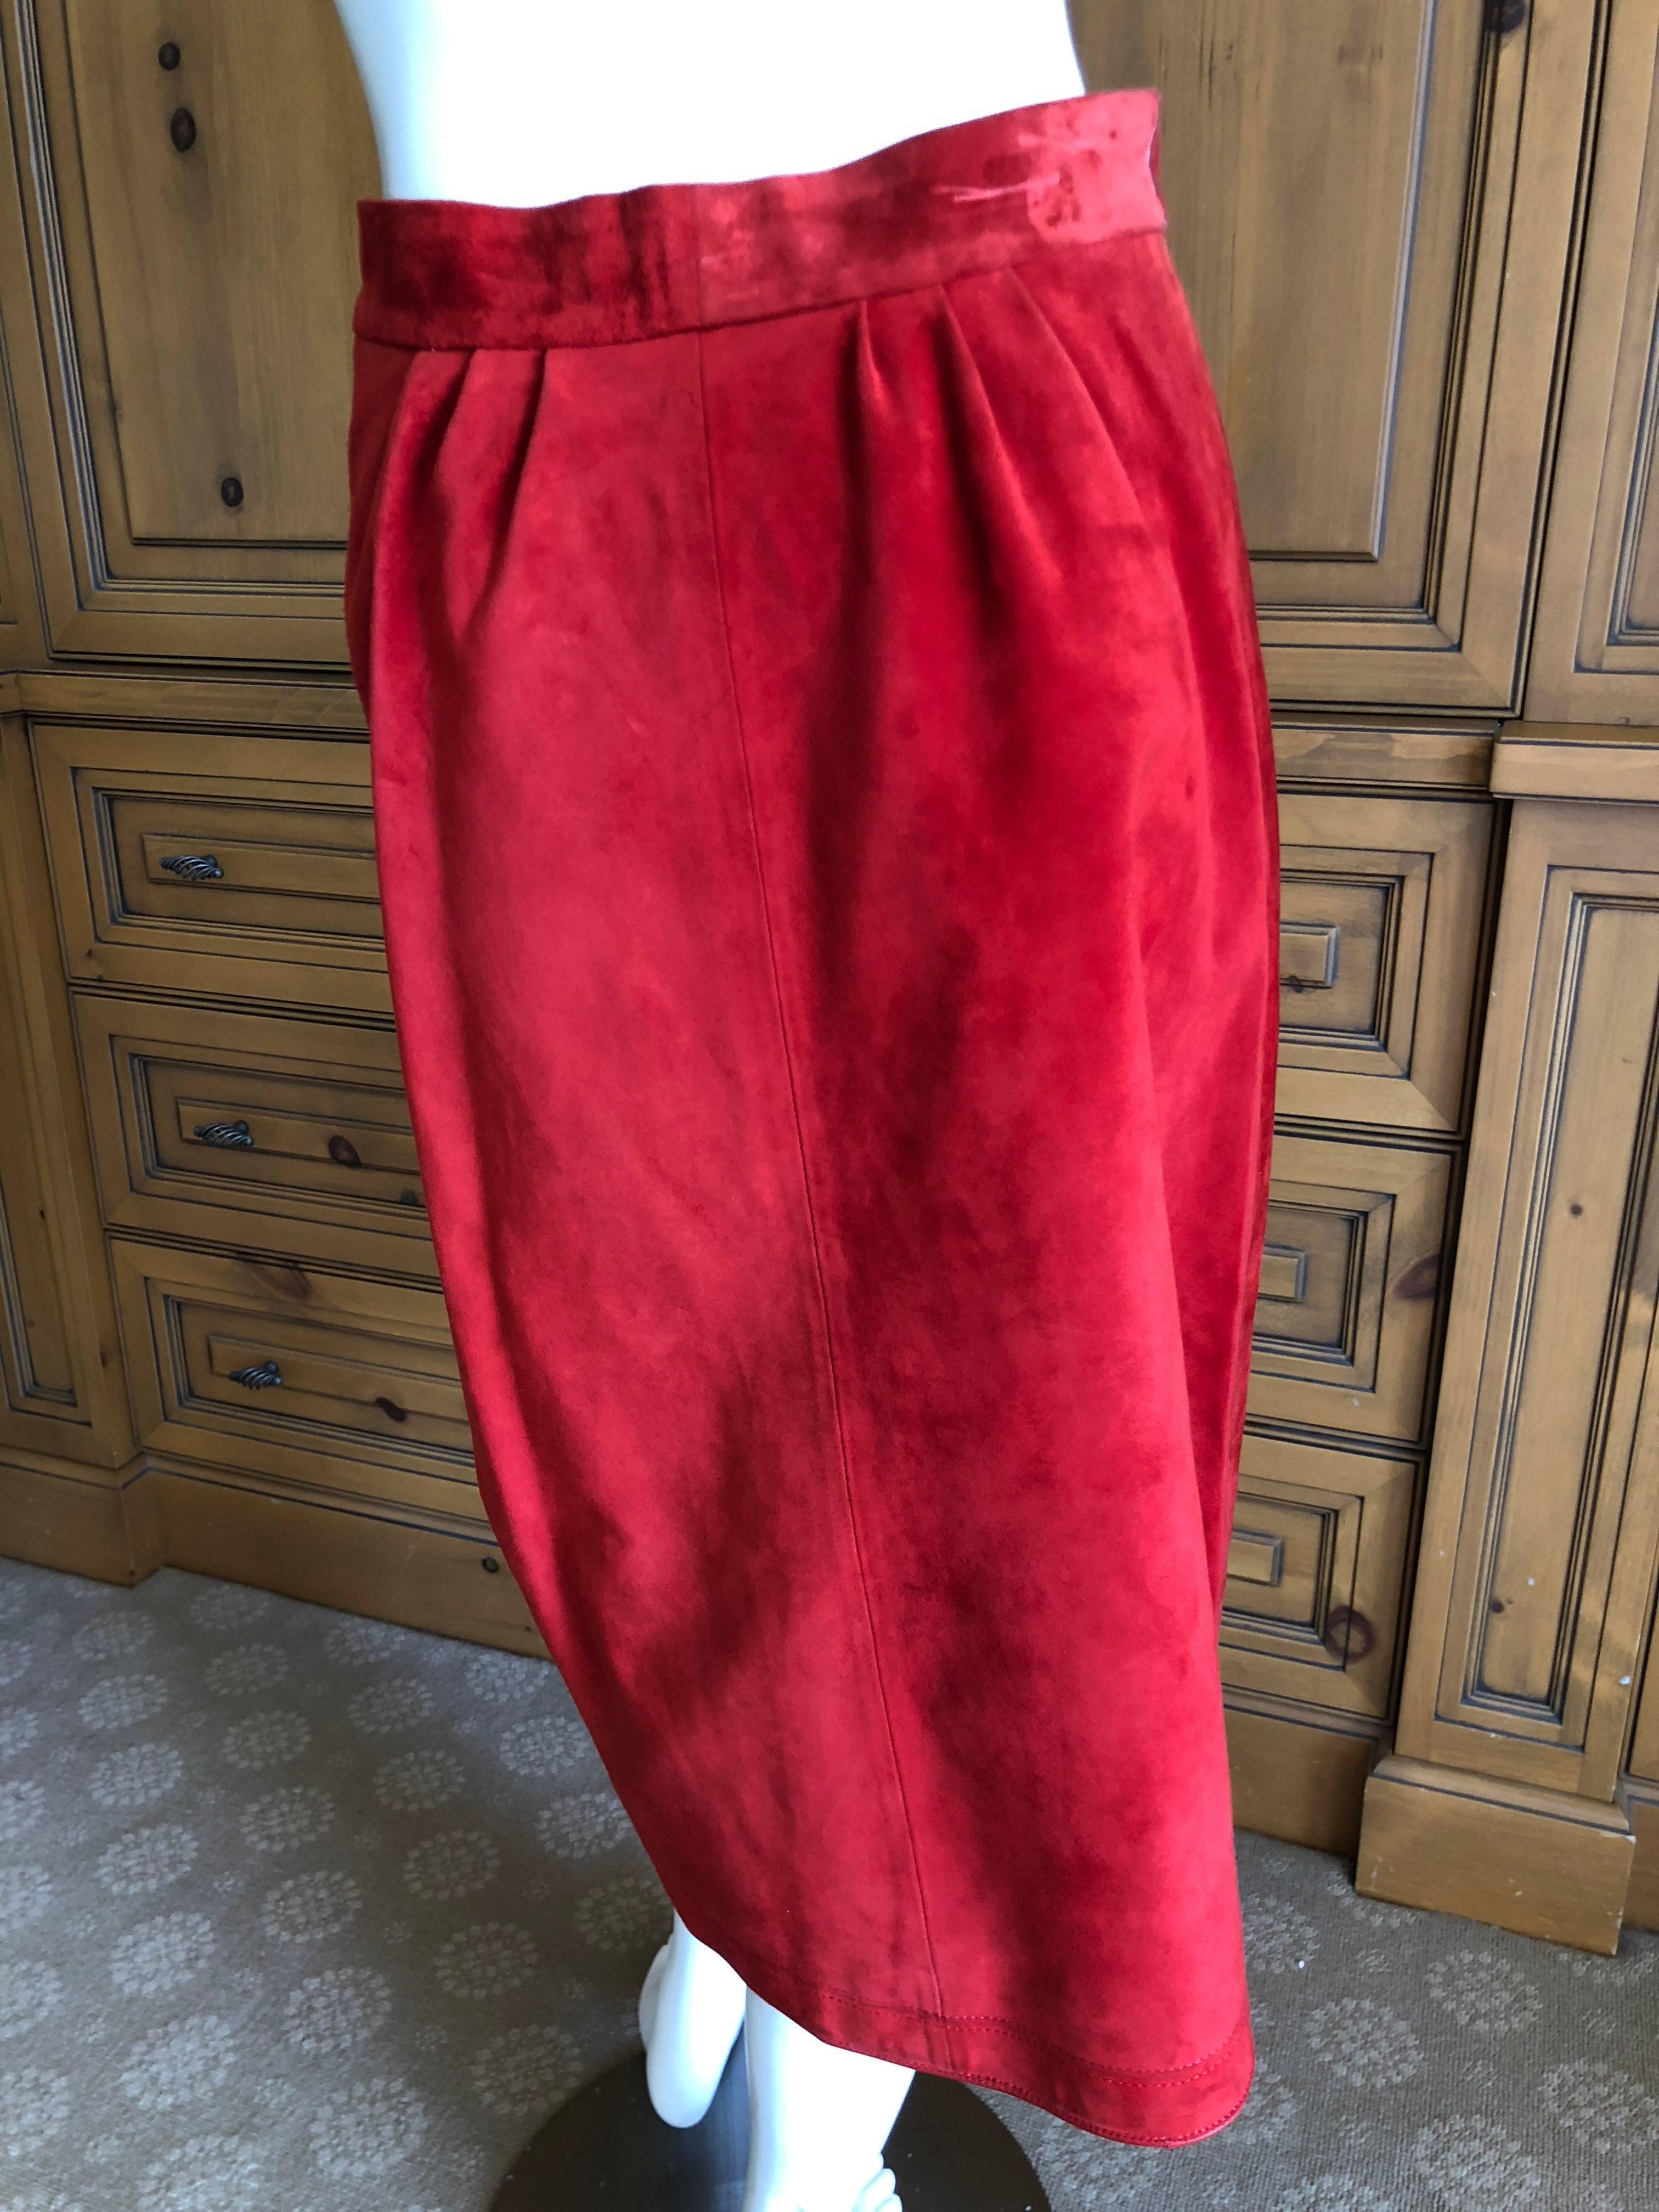  Gucci 1970's Red Leather Trim Suede Skirt with Chain Details and Big GG Buttons For Sale 3